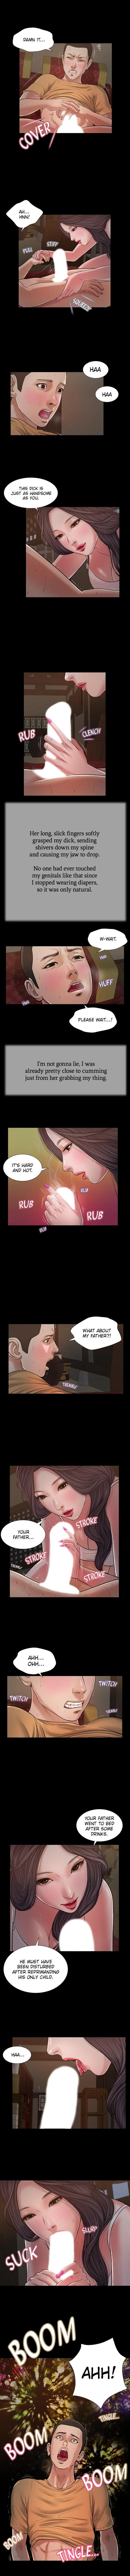 Concubine - Chapter 21 Page 4